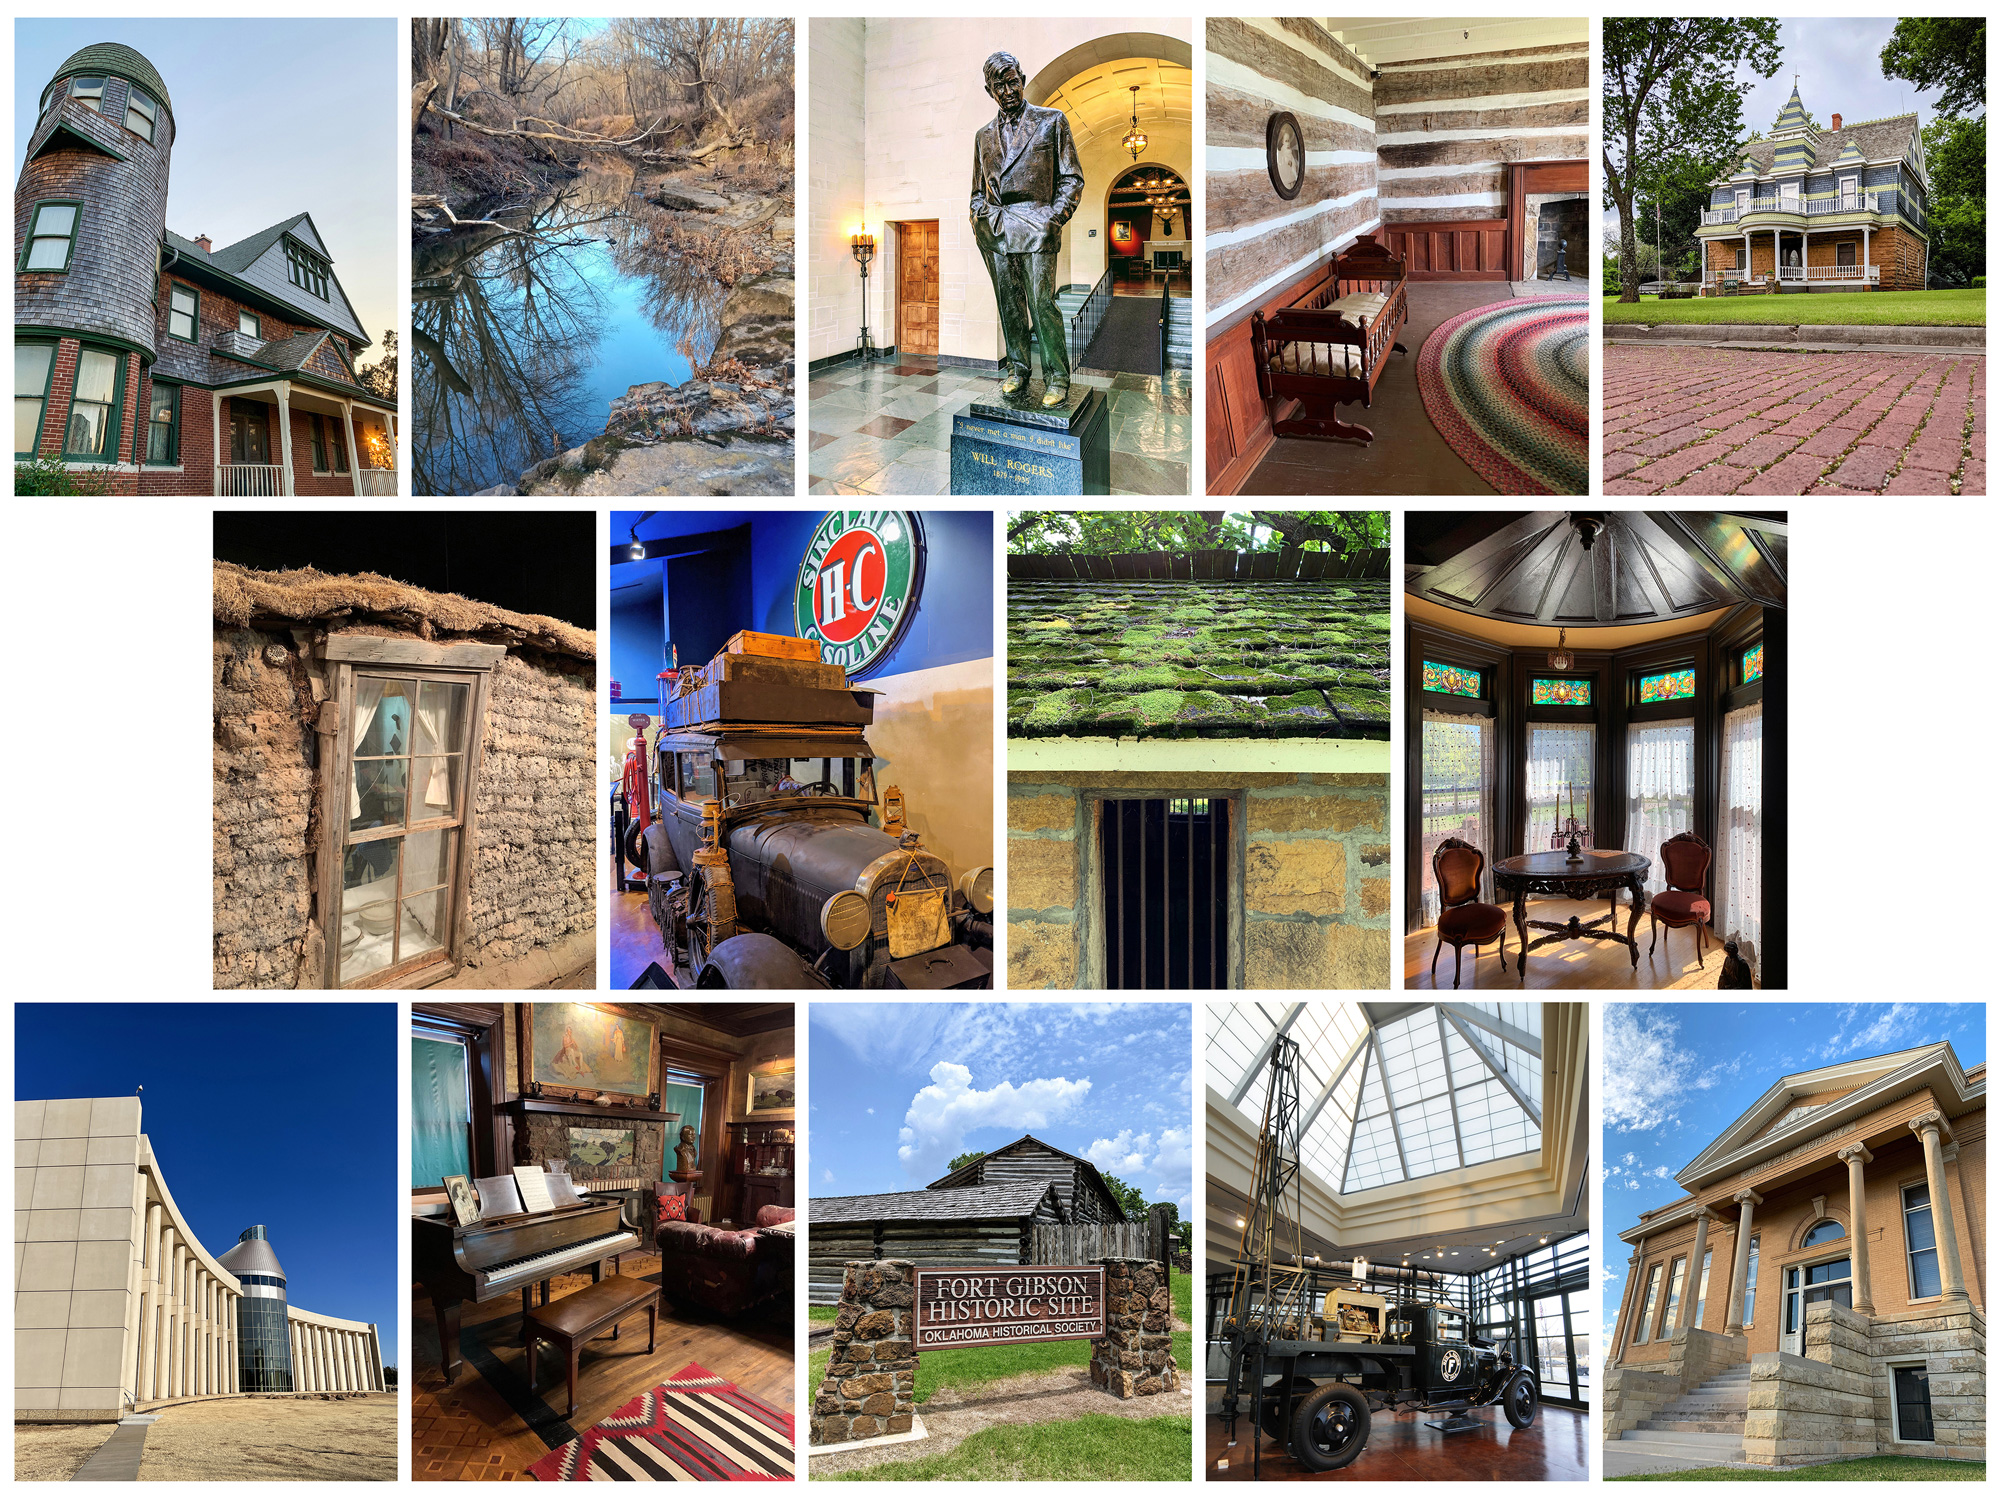 A collage of fourteen images of historic museums and sites, showing site exteriors, interoriors, historic vehicles, a sod house, and a statue of Will Rogers